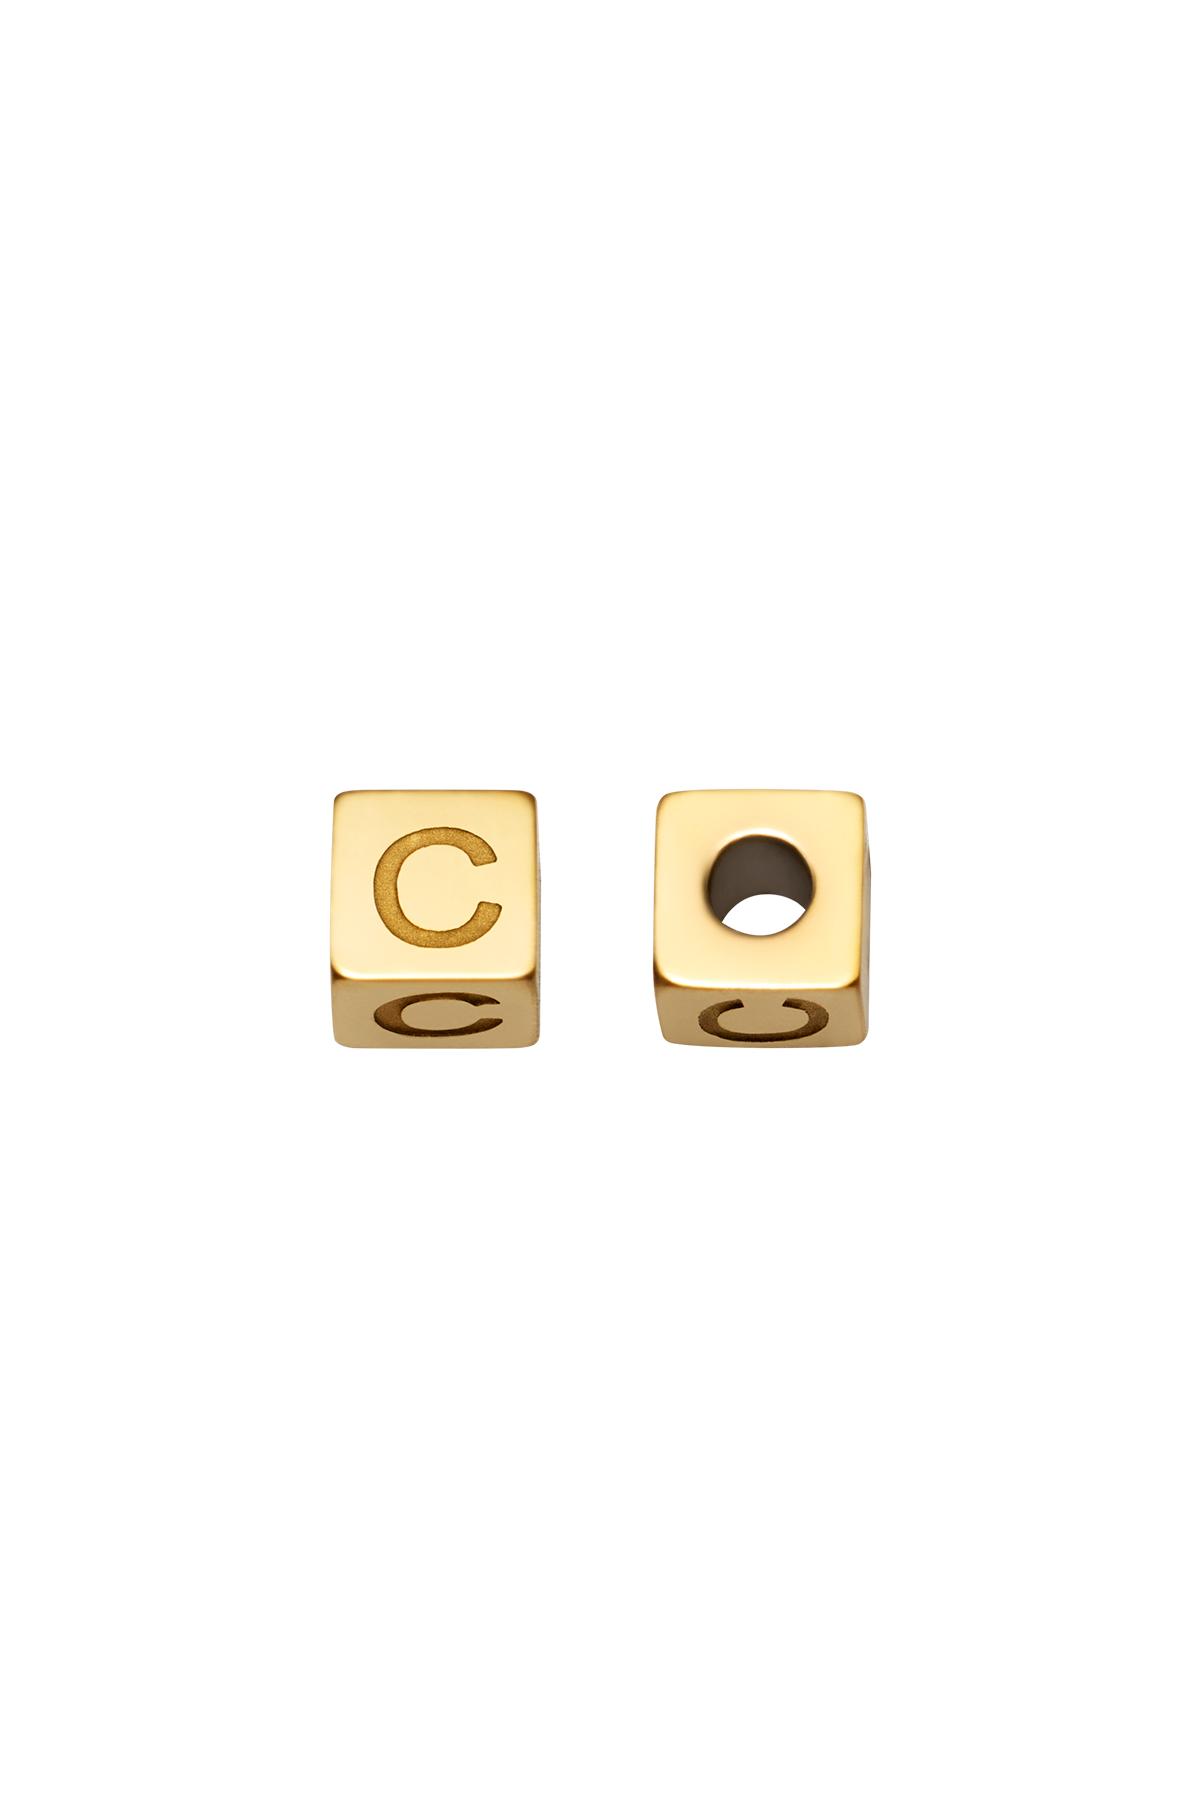 Gold / DIY Beads Alphabet Gold C Stainless Steel Picture19